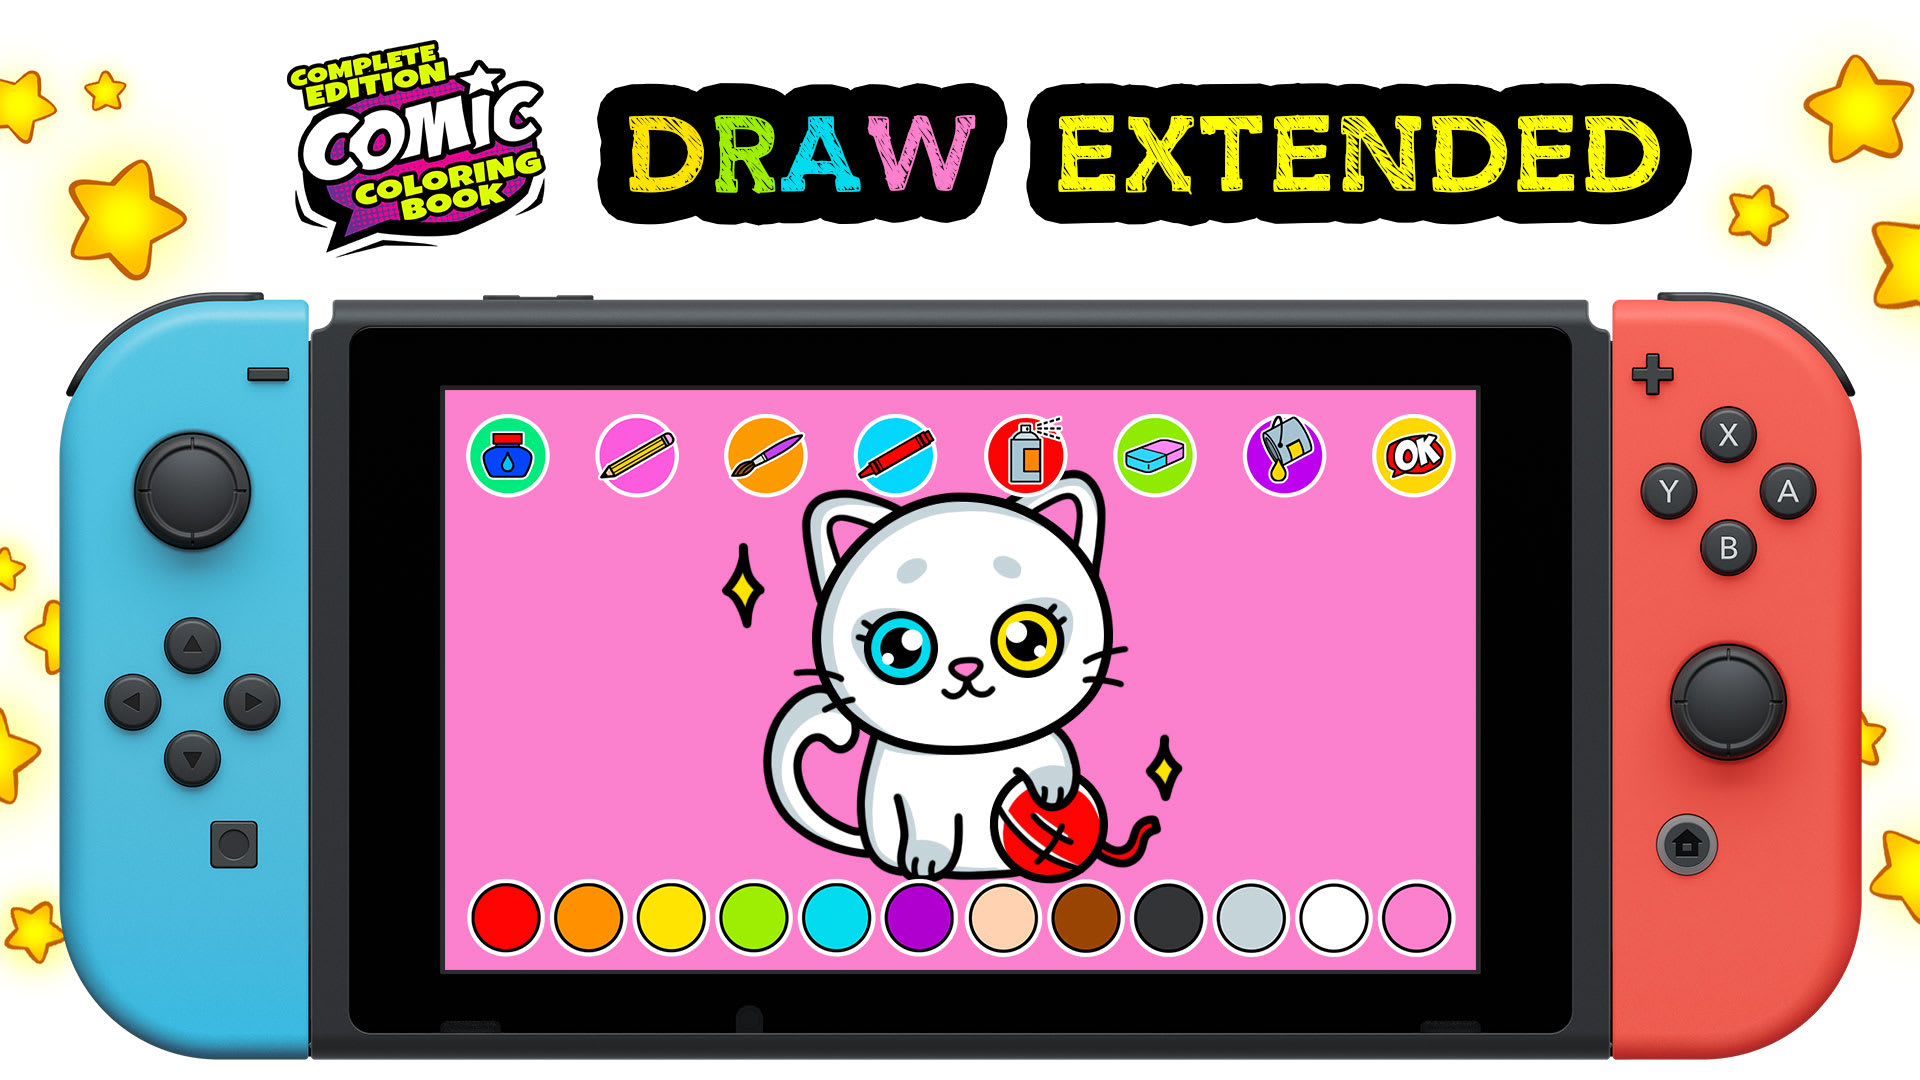 Comic Coloring Book Complete Edition: DRAW Extended